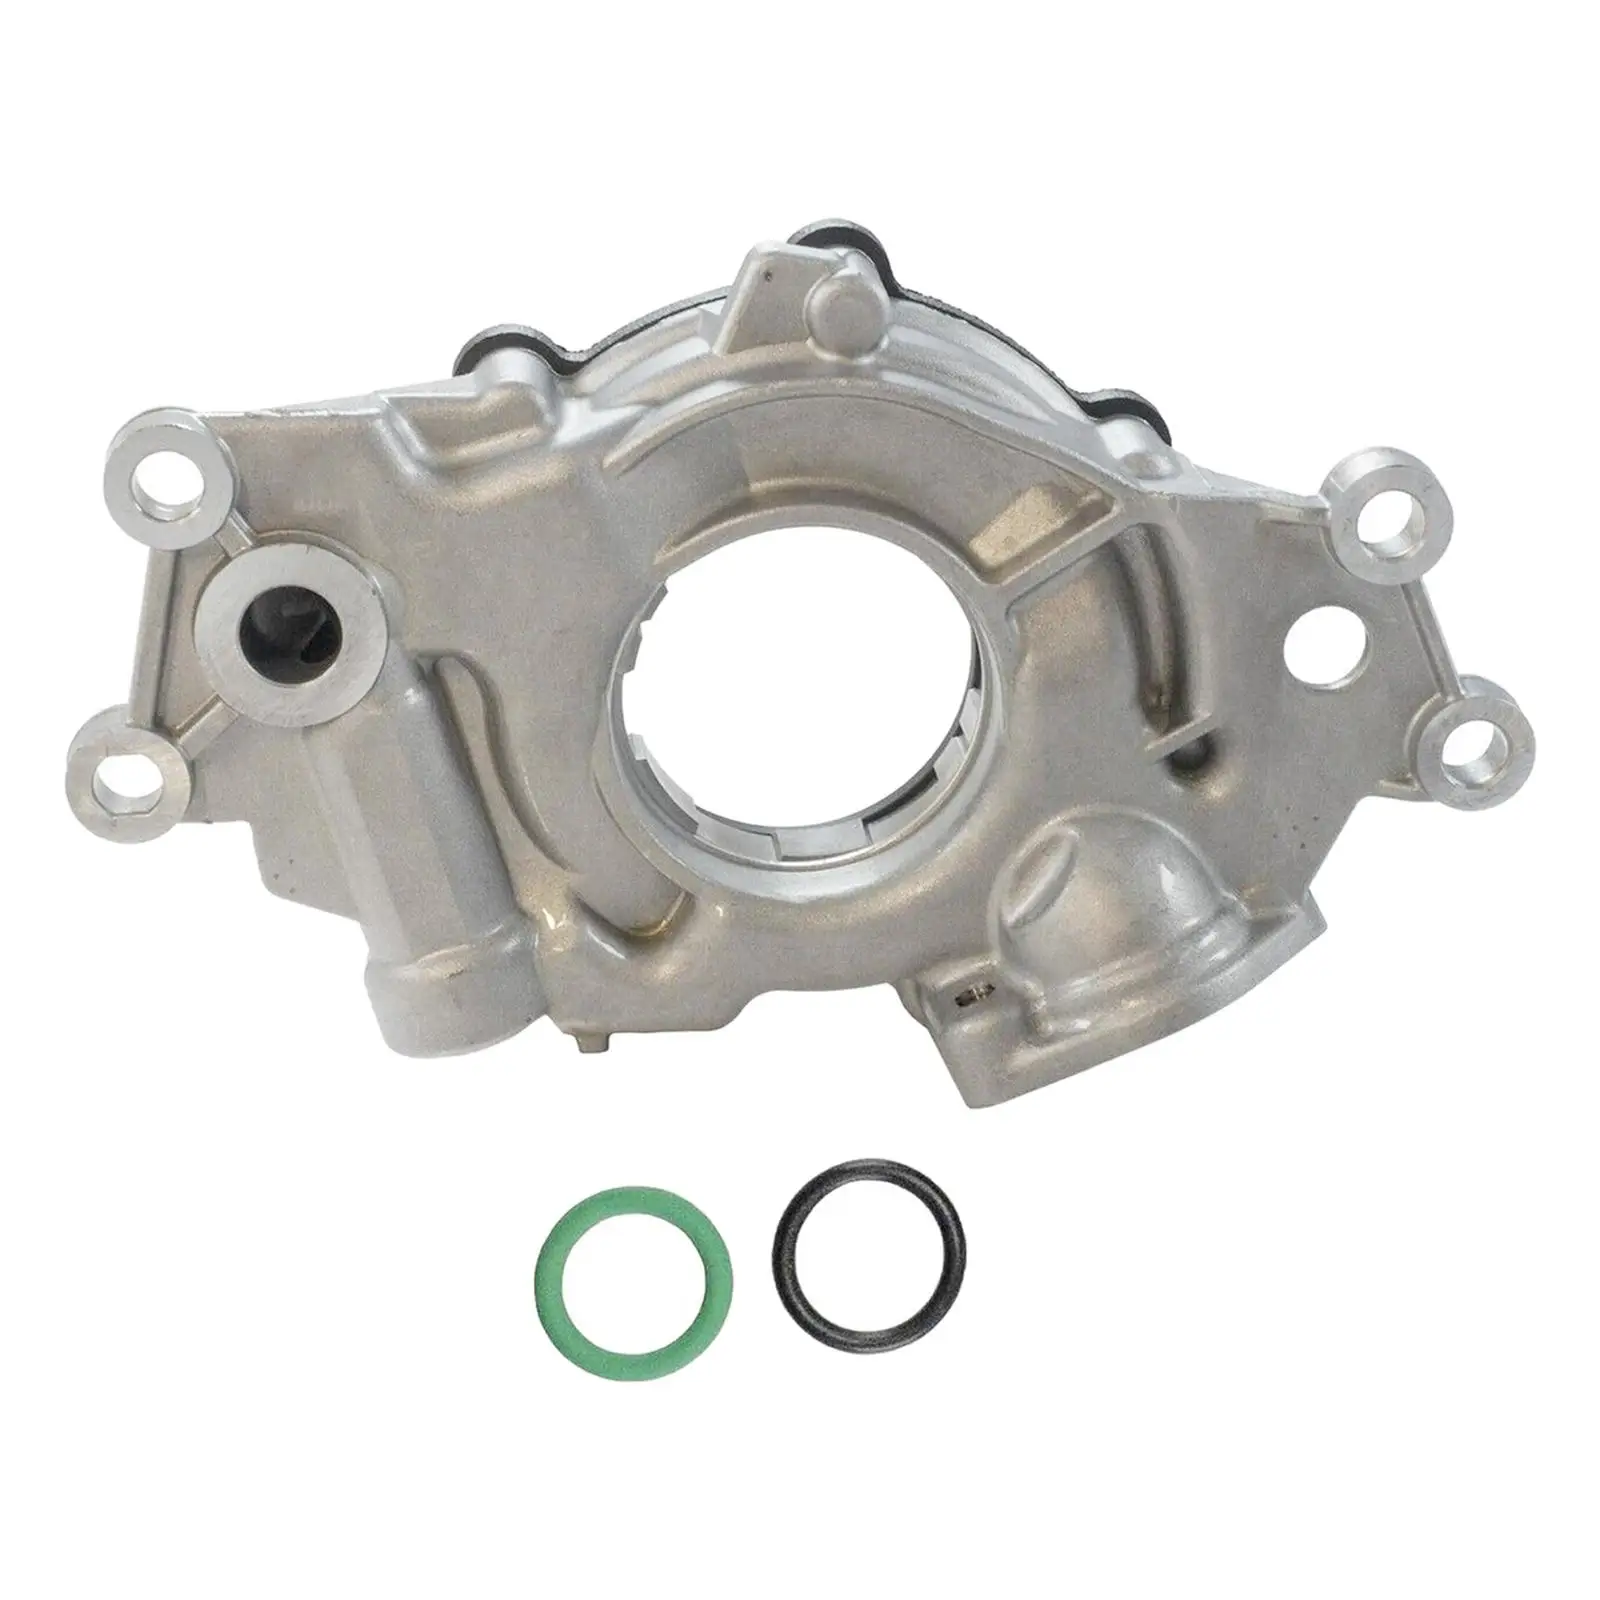 Oil Pump Replacement Quality Easy Installation Auto Accessories for Gen 4 Ls-based Engines 5.3L 6.0L 6.2L L94 Lsa LH9 Lmf